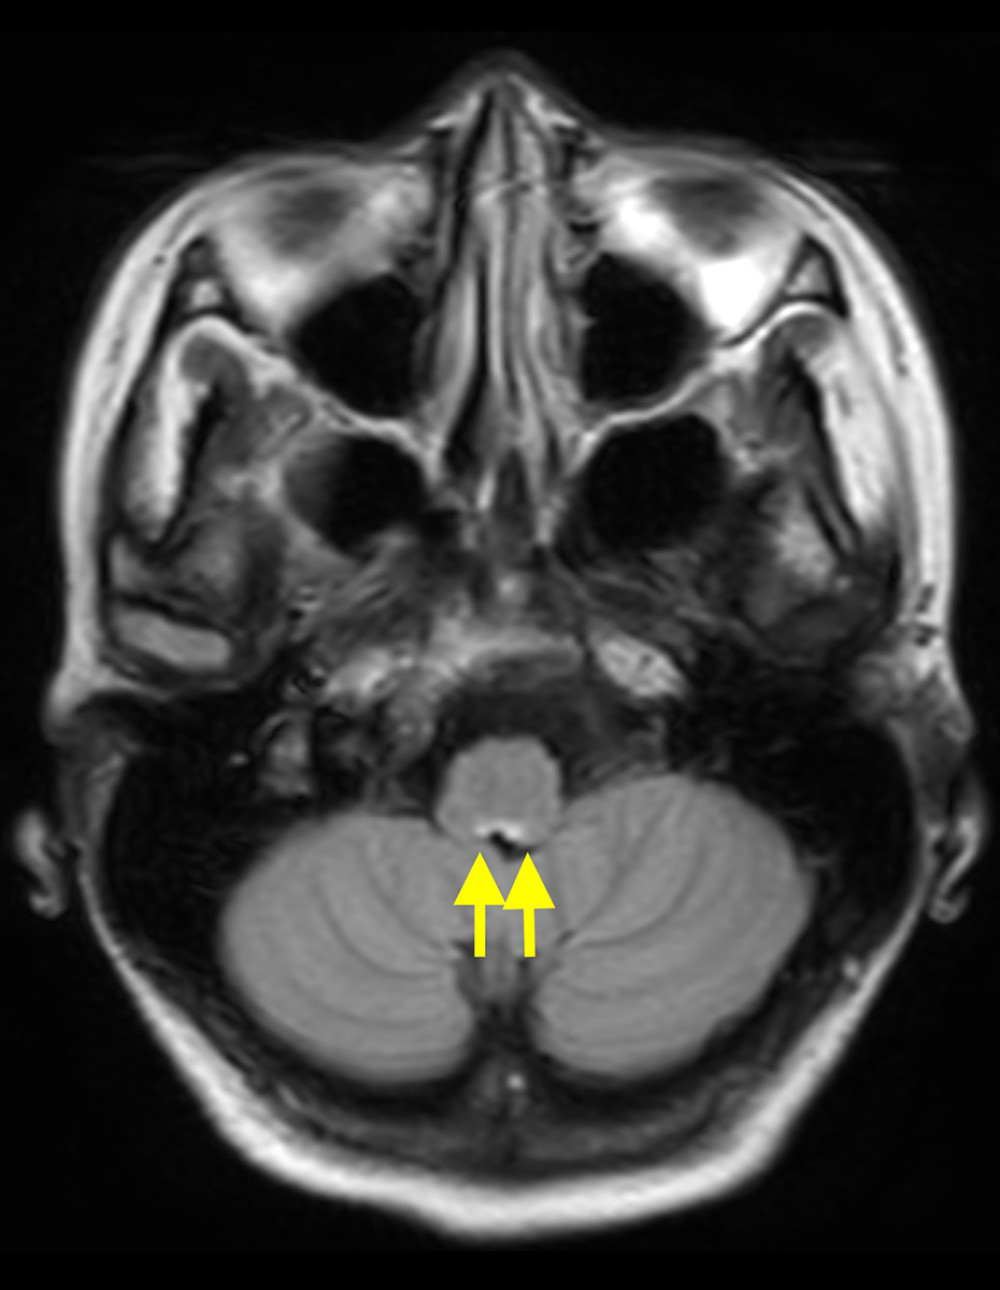 Brain magnetic resonance imaging on day 8 of admission. Retrospective evaluation reveals a small linear hyperintense lesion (yellow arrows) in the dorsal medulla oblongata on fluid-attenuated inversion recovery sequence image (FLAIR).